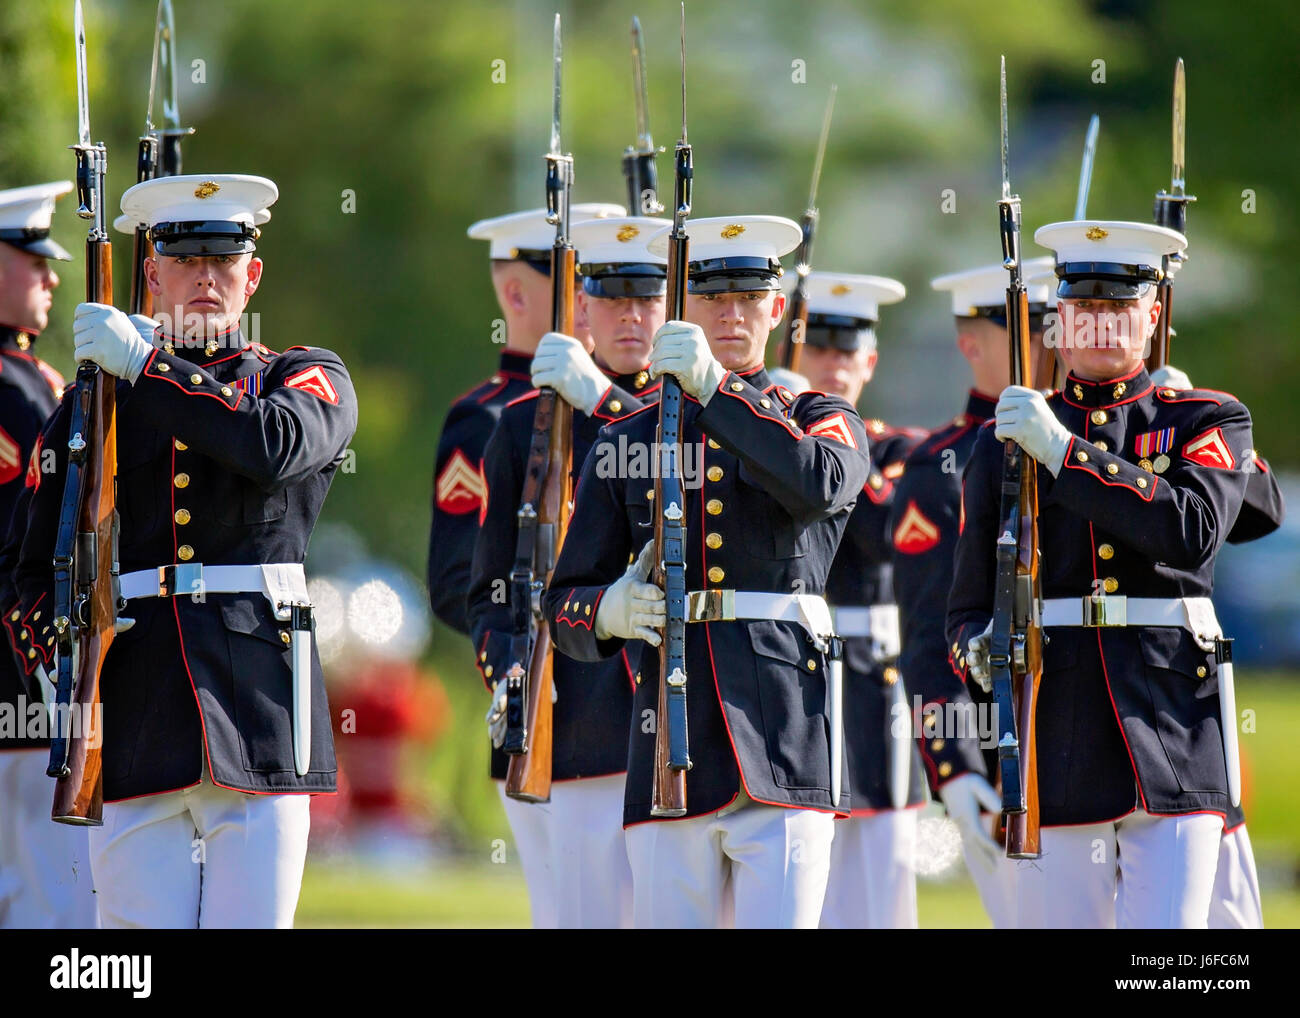 The U.S. Marine Corps Silent Drill Platoon performs during the Centennial Celebration Ceremony at Lejeune Field, Marine Corps Base (MCB) Quantico, Va., May 10, 2017. The event commemorates the founding of MCB Quantico in 1917, and consisted of performances by the U.S. Marine Corps Silent Drill Platoon and the U.S. Marine Drum & Bugle Corps. (U.S. Marine Corps photo by James H. Frank) Stock Photo